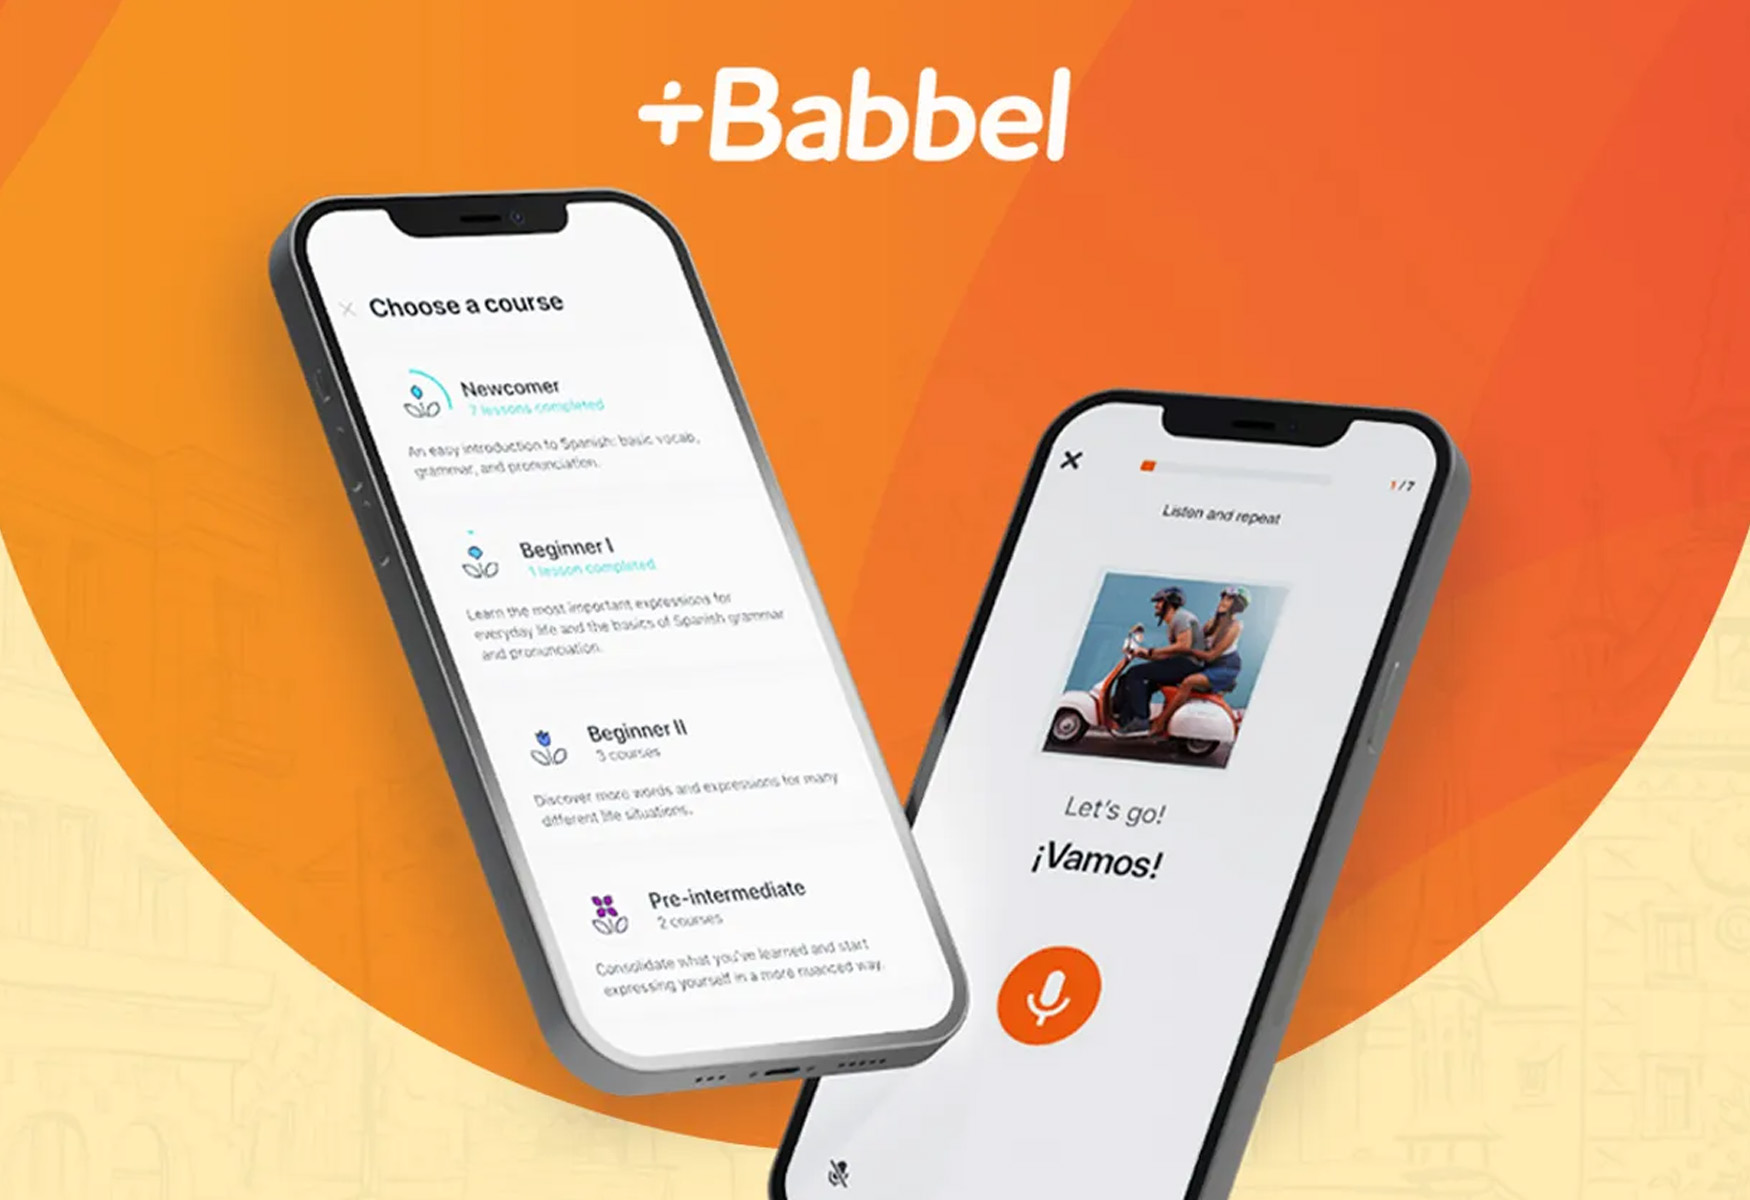 Give The Gift Of Language Learning With Babbel, Now $449 Off During The Merry Elfin’ Christmas Campaign